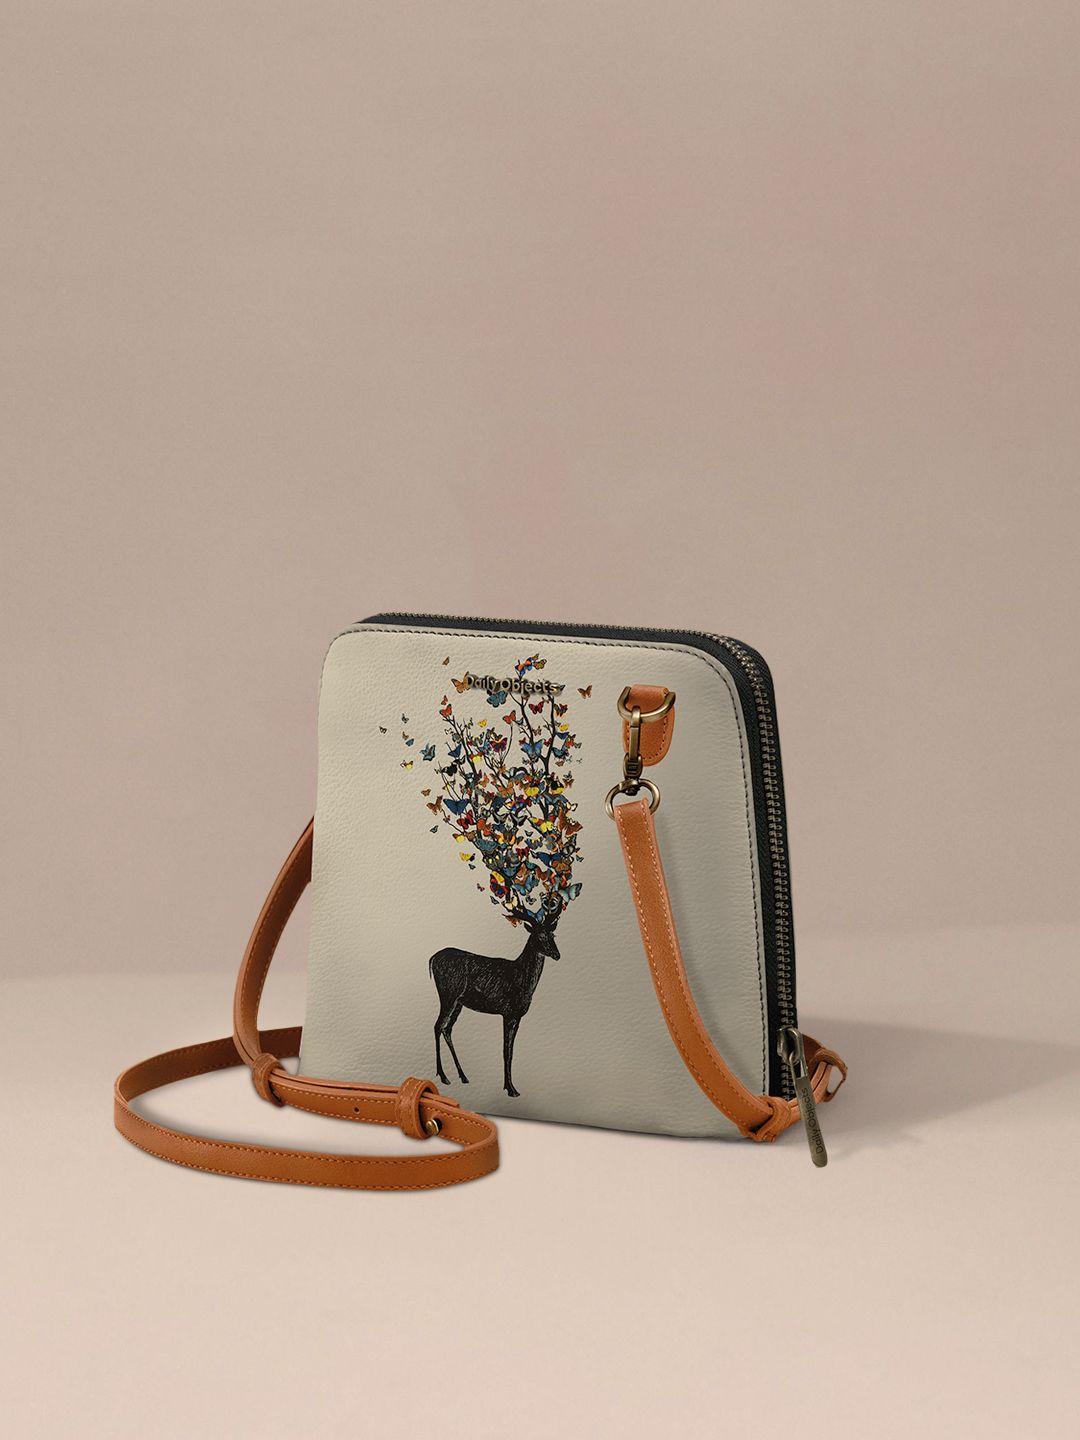 dailyobjects multicoloured printed sling bag